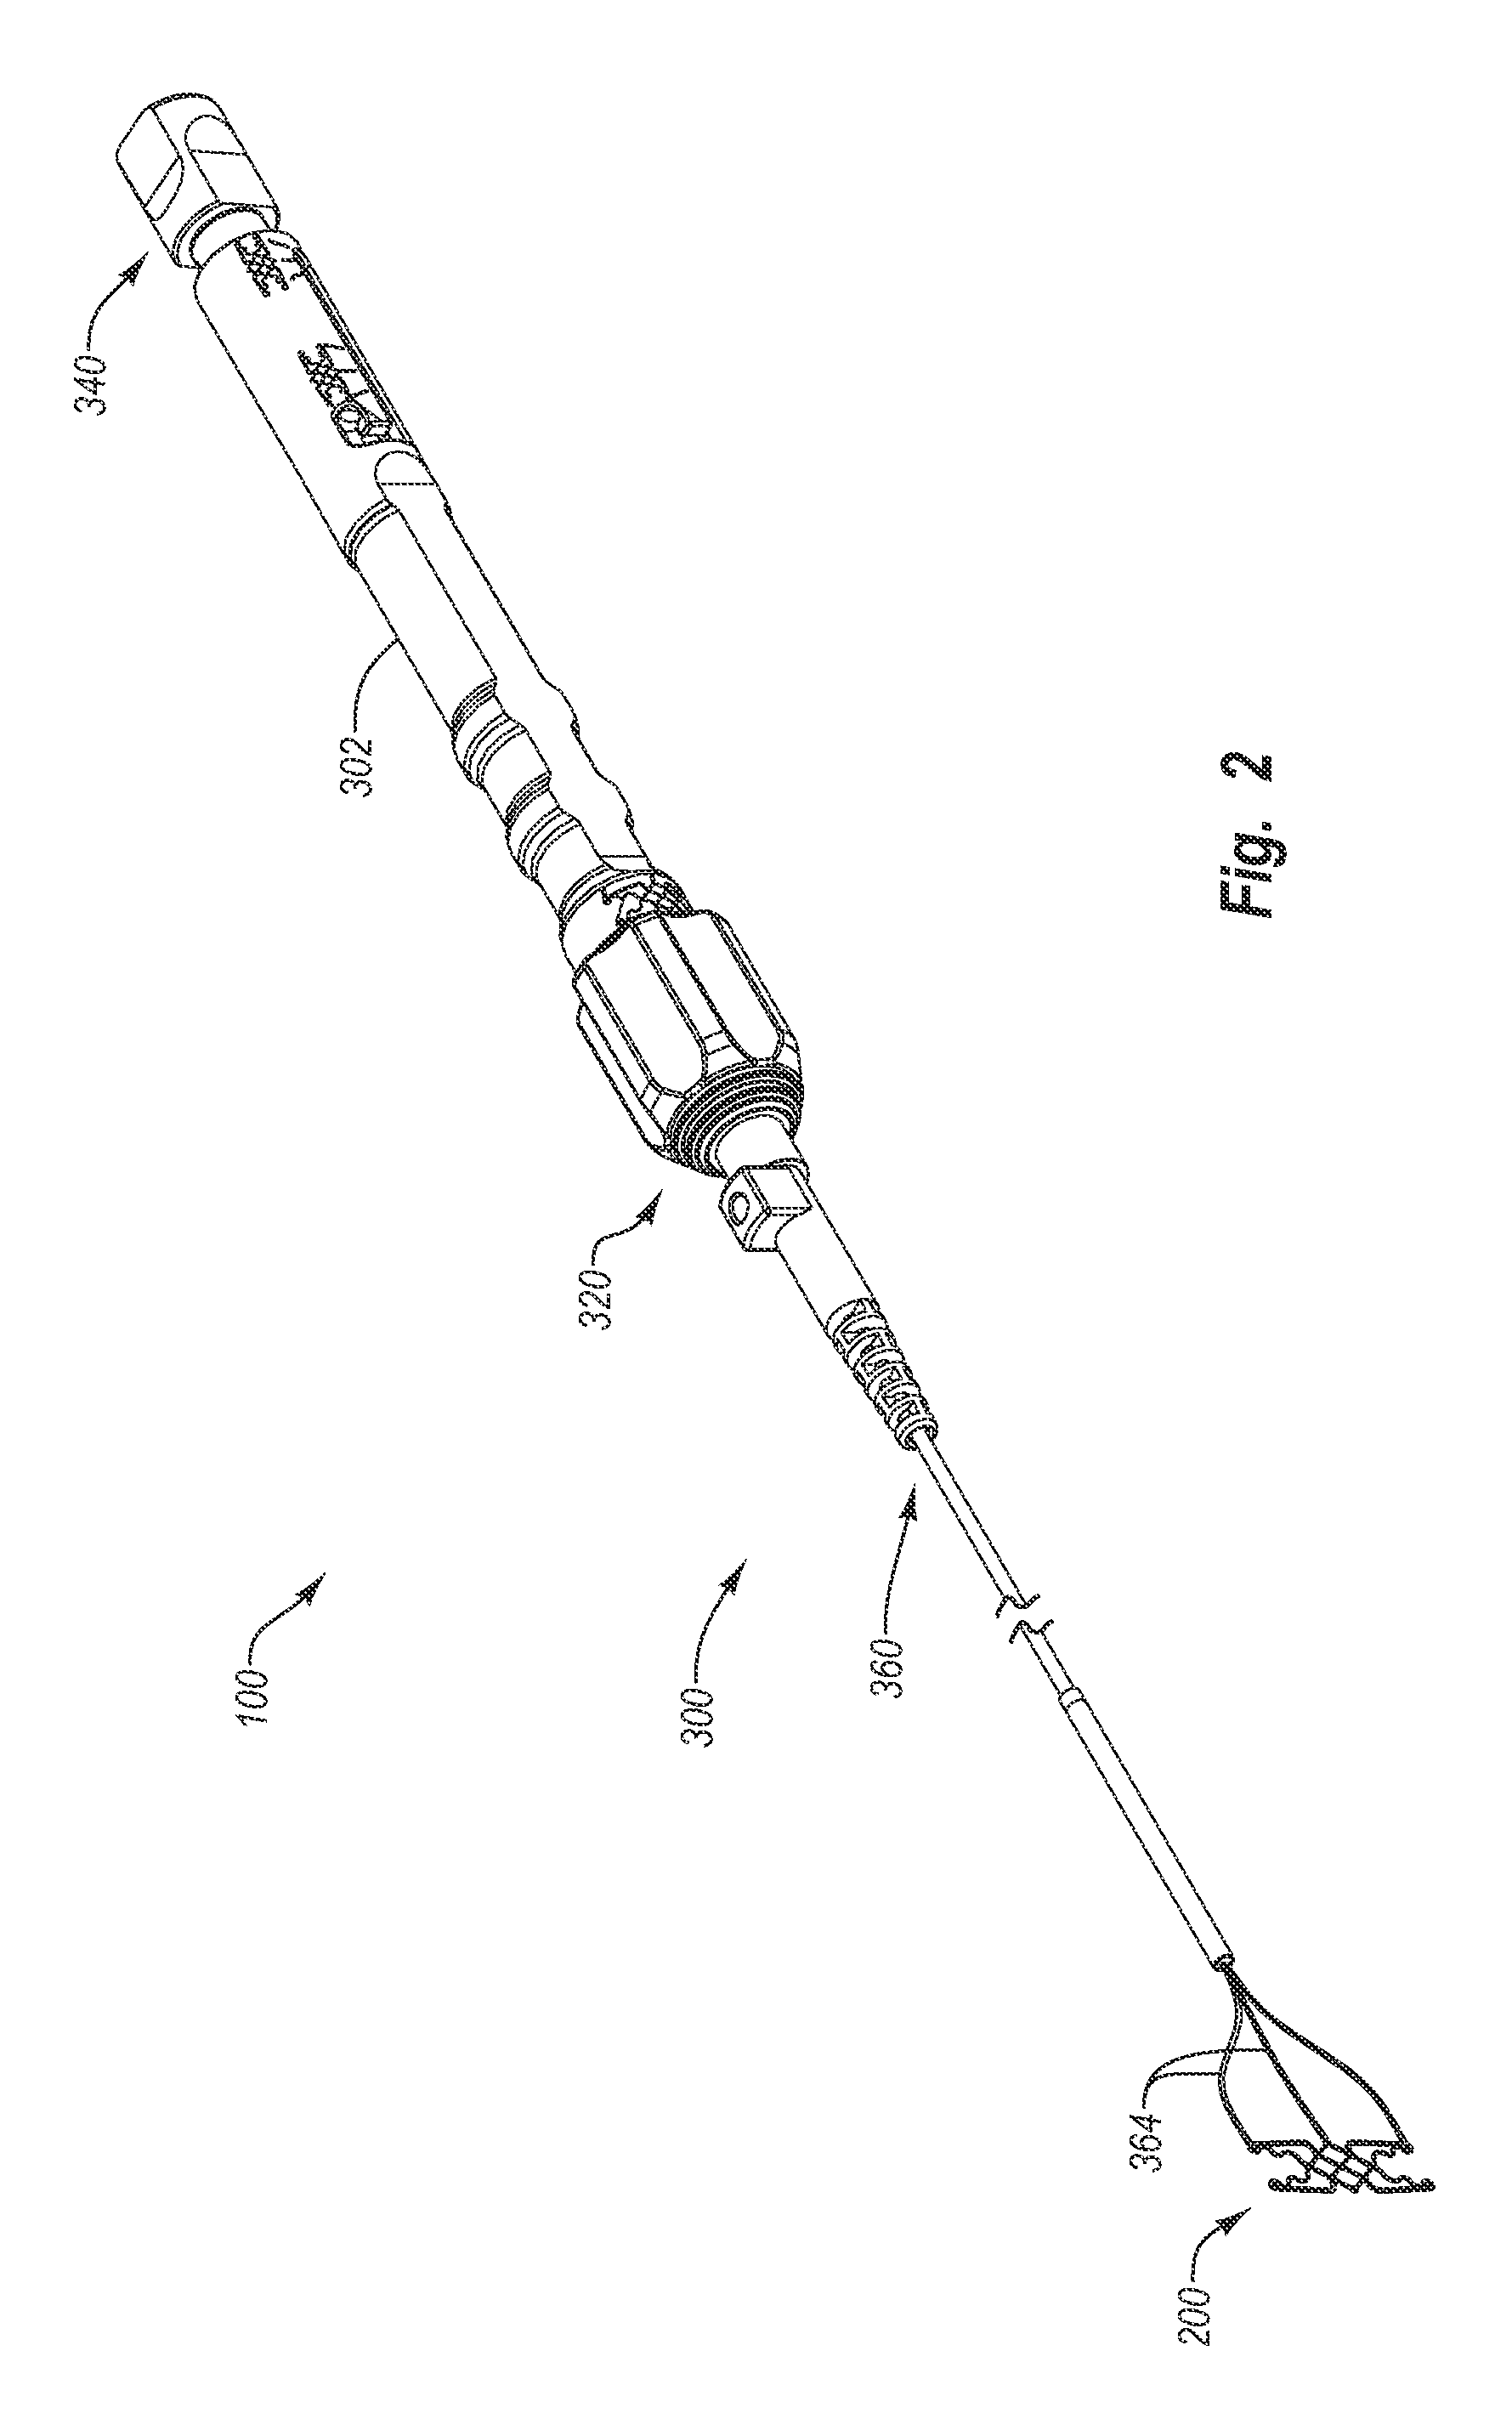 Devices for reducing the size of an internal tissue opening